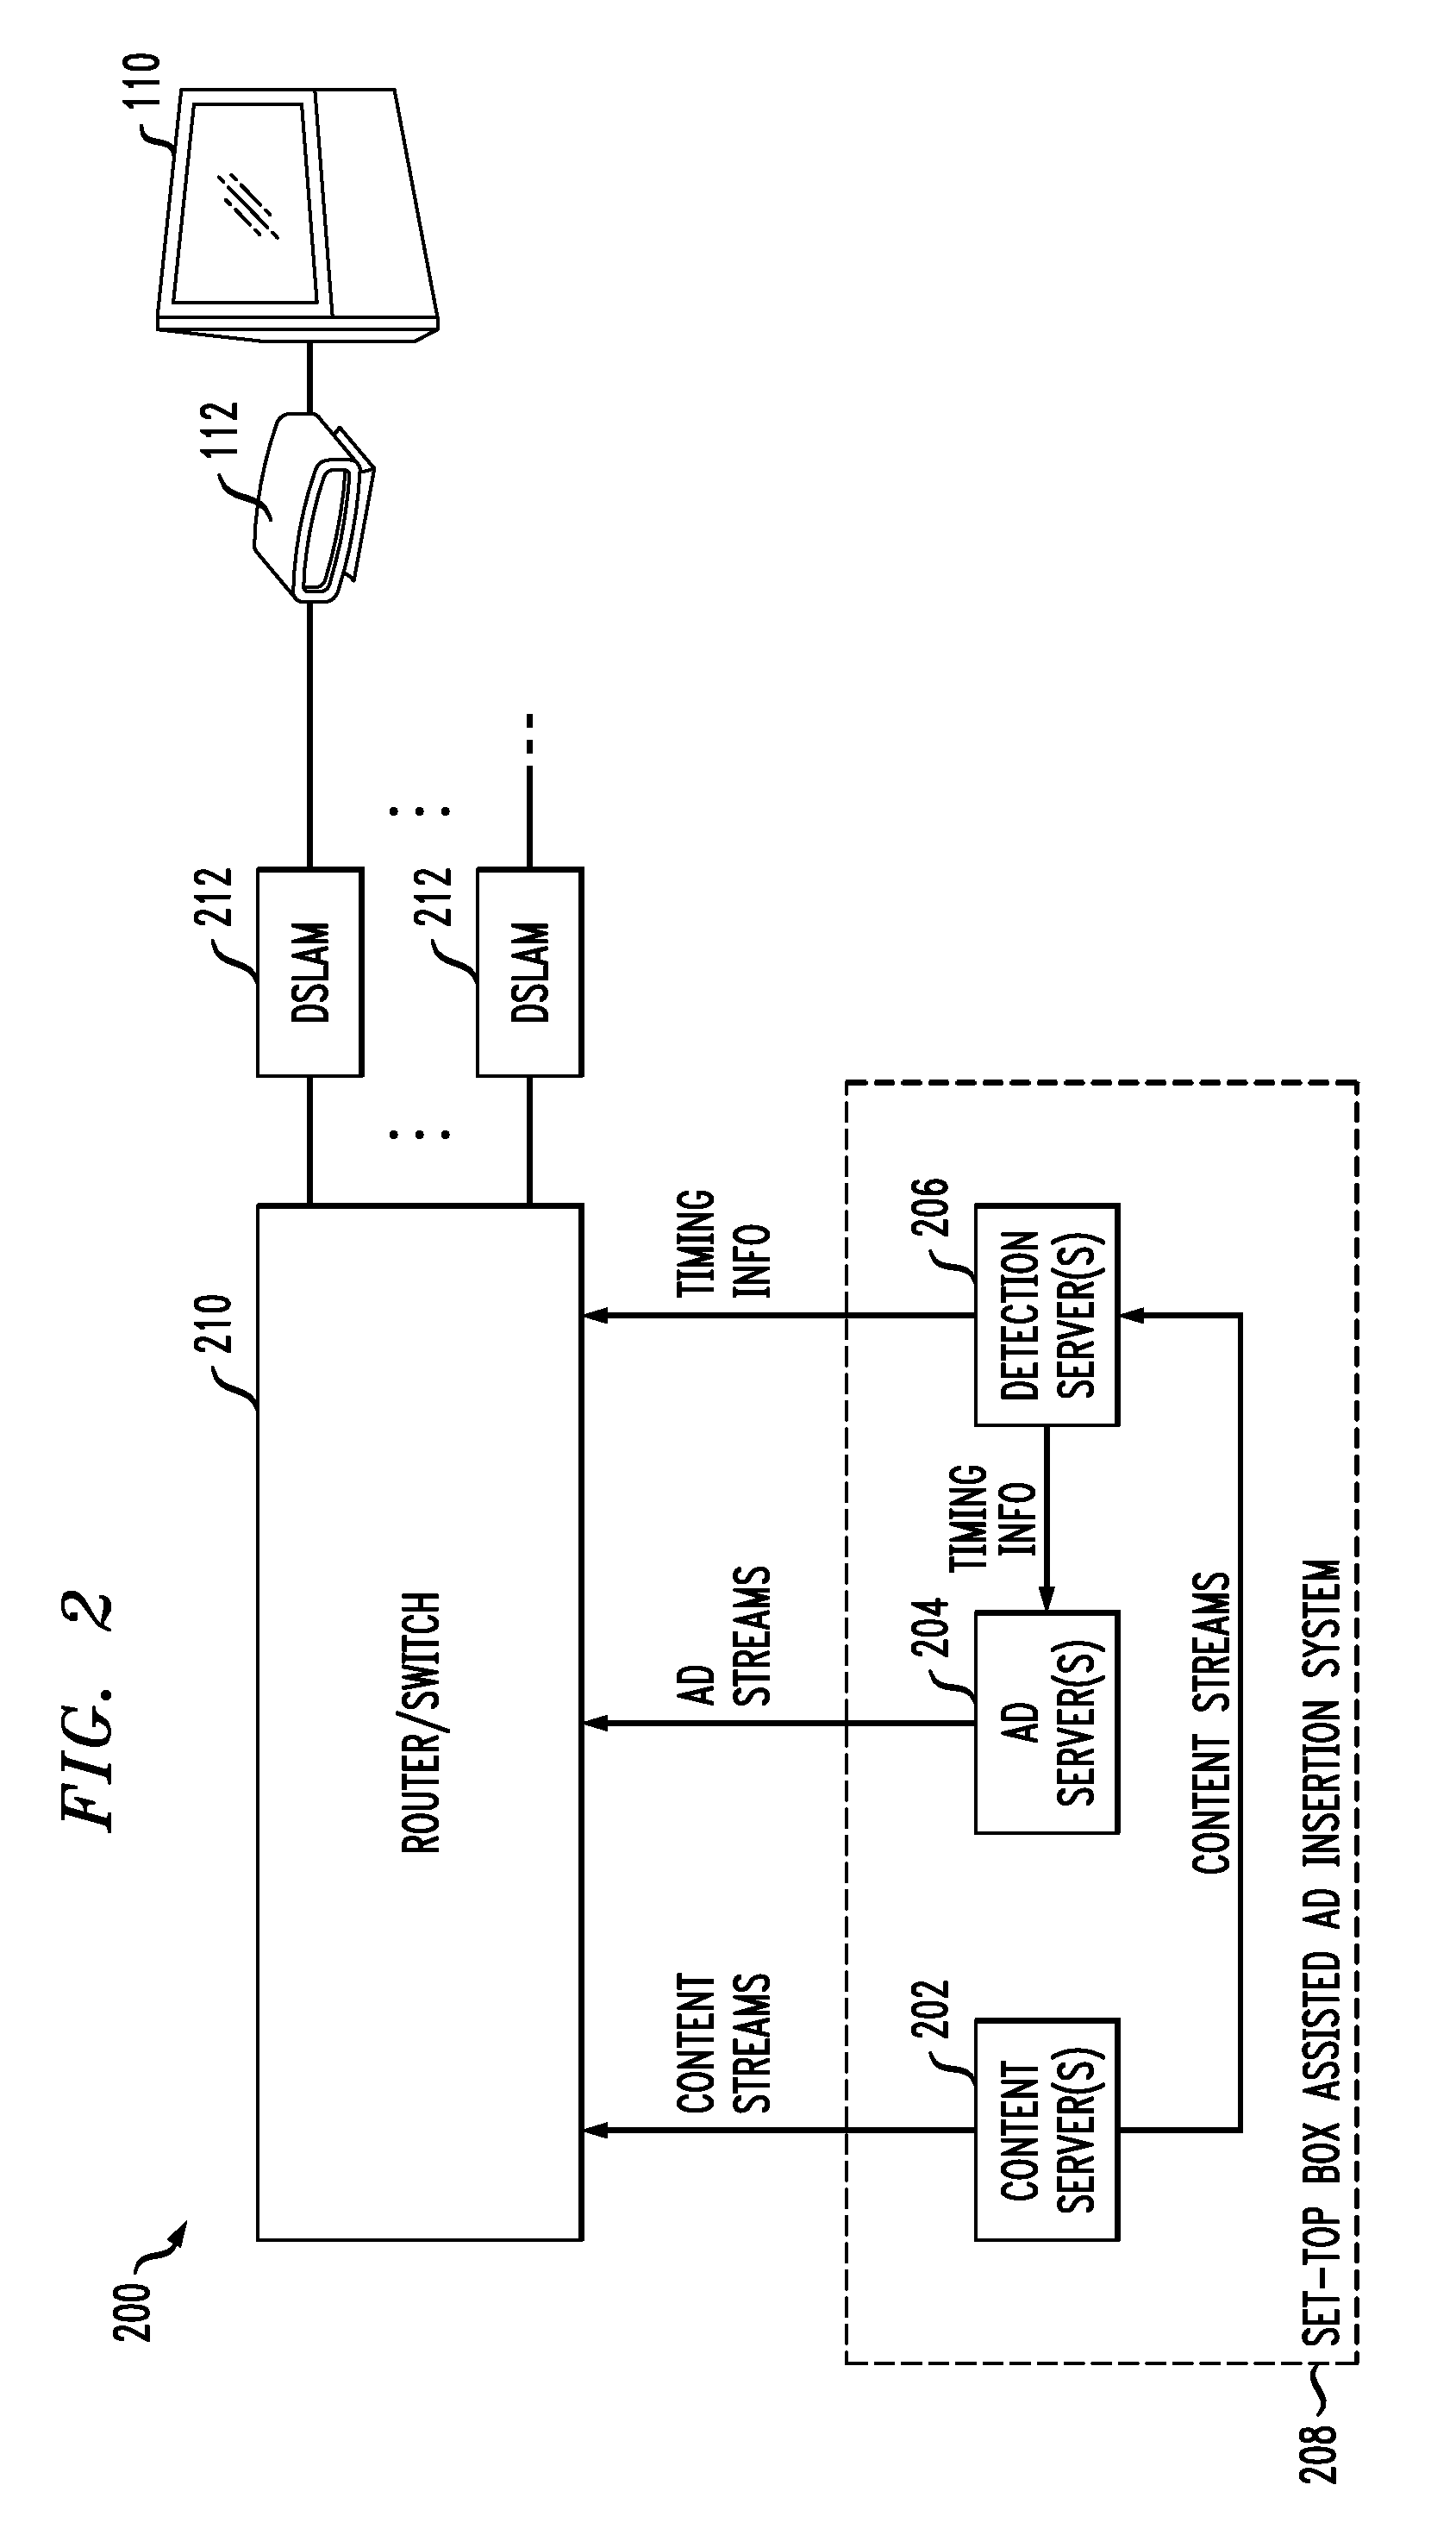 Interface Device Having Multiple Software Clients to Facilitate Display of Targeted Information